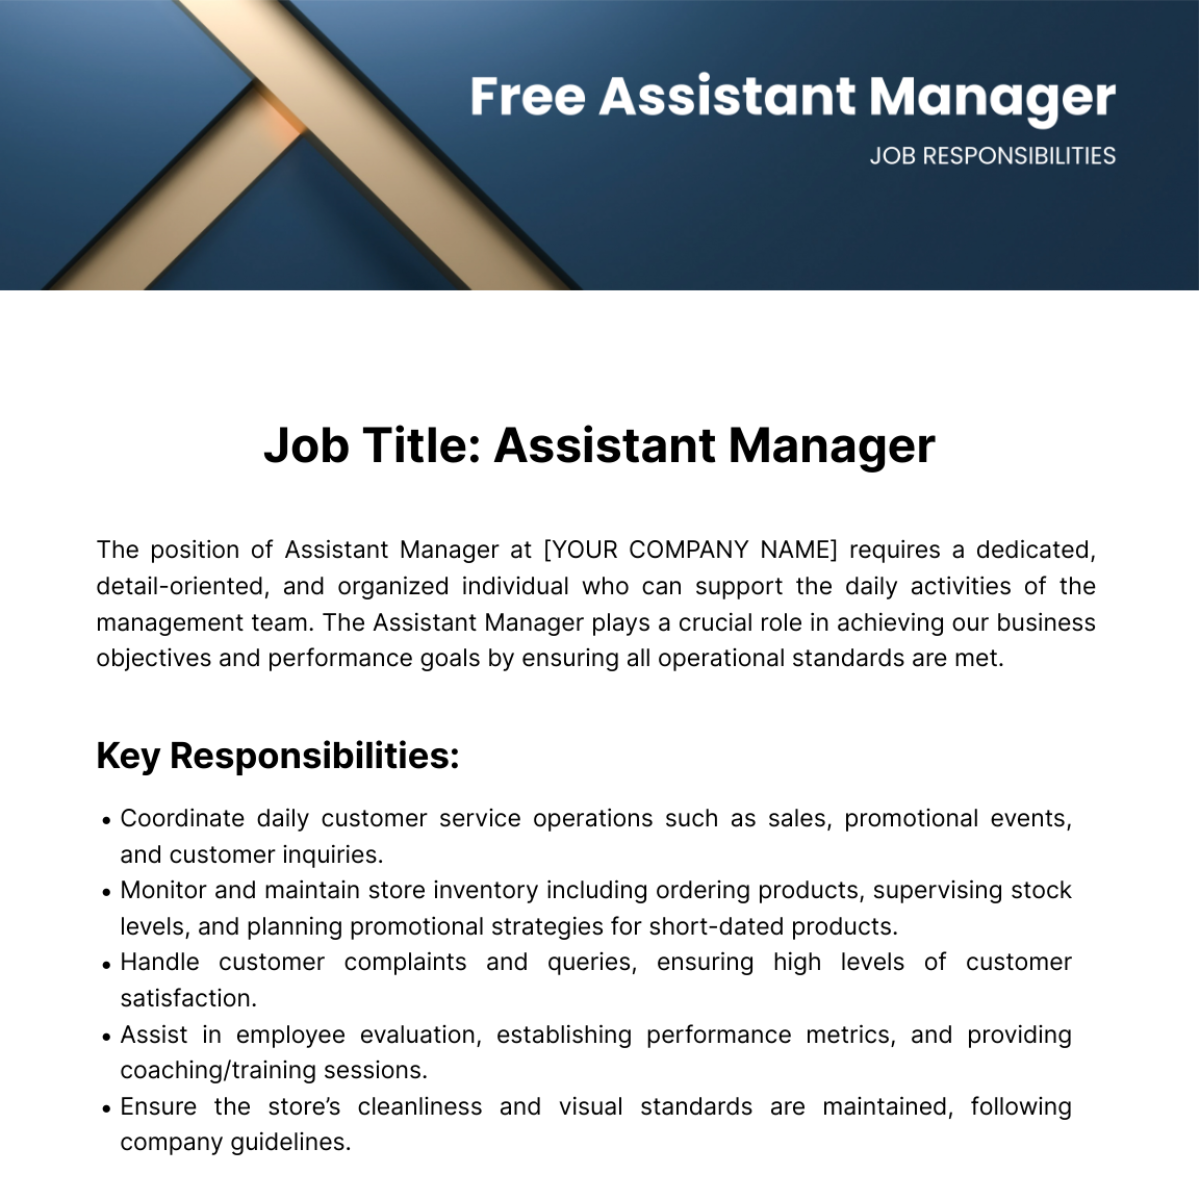 Free Assistant Manager Job Responsibilities Template